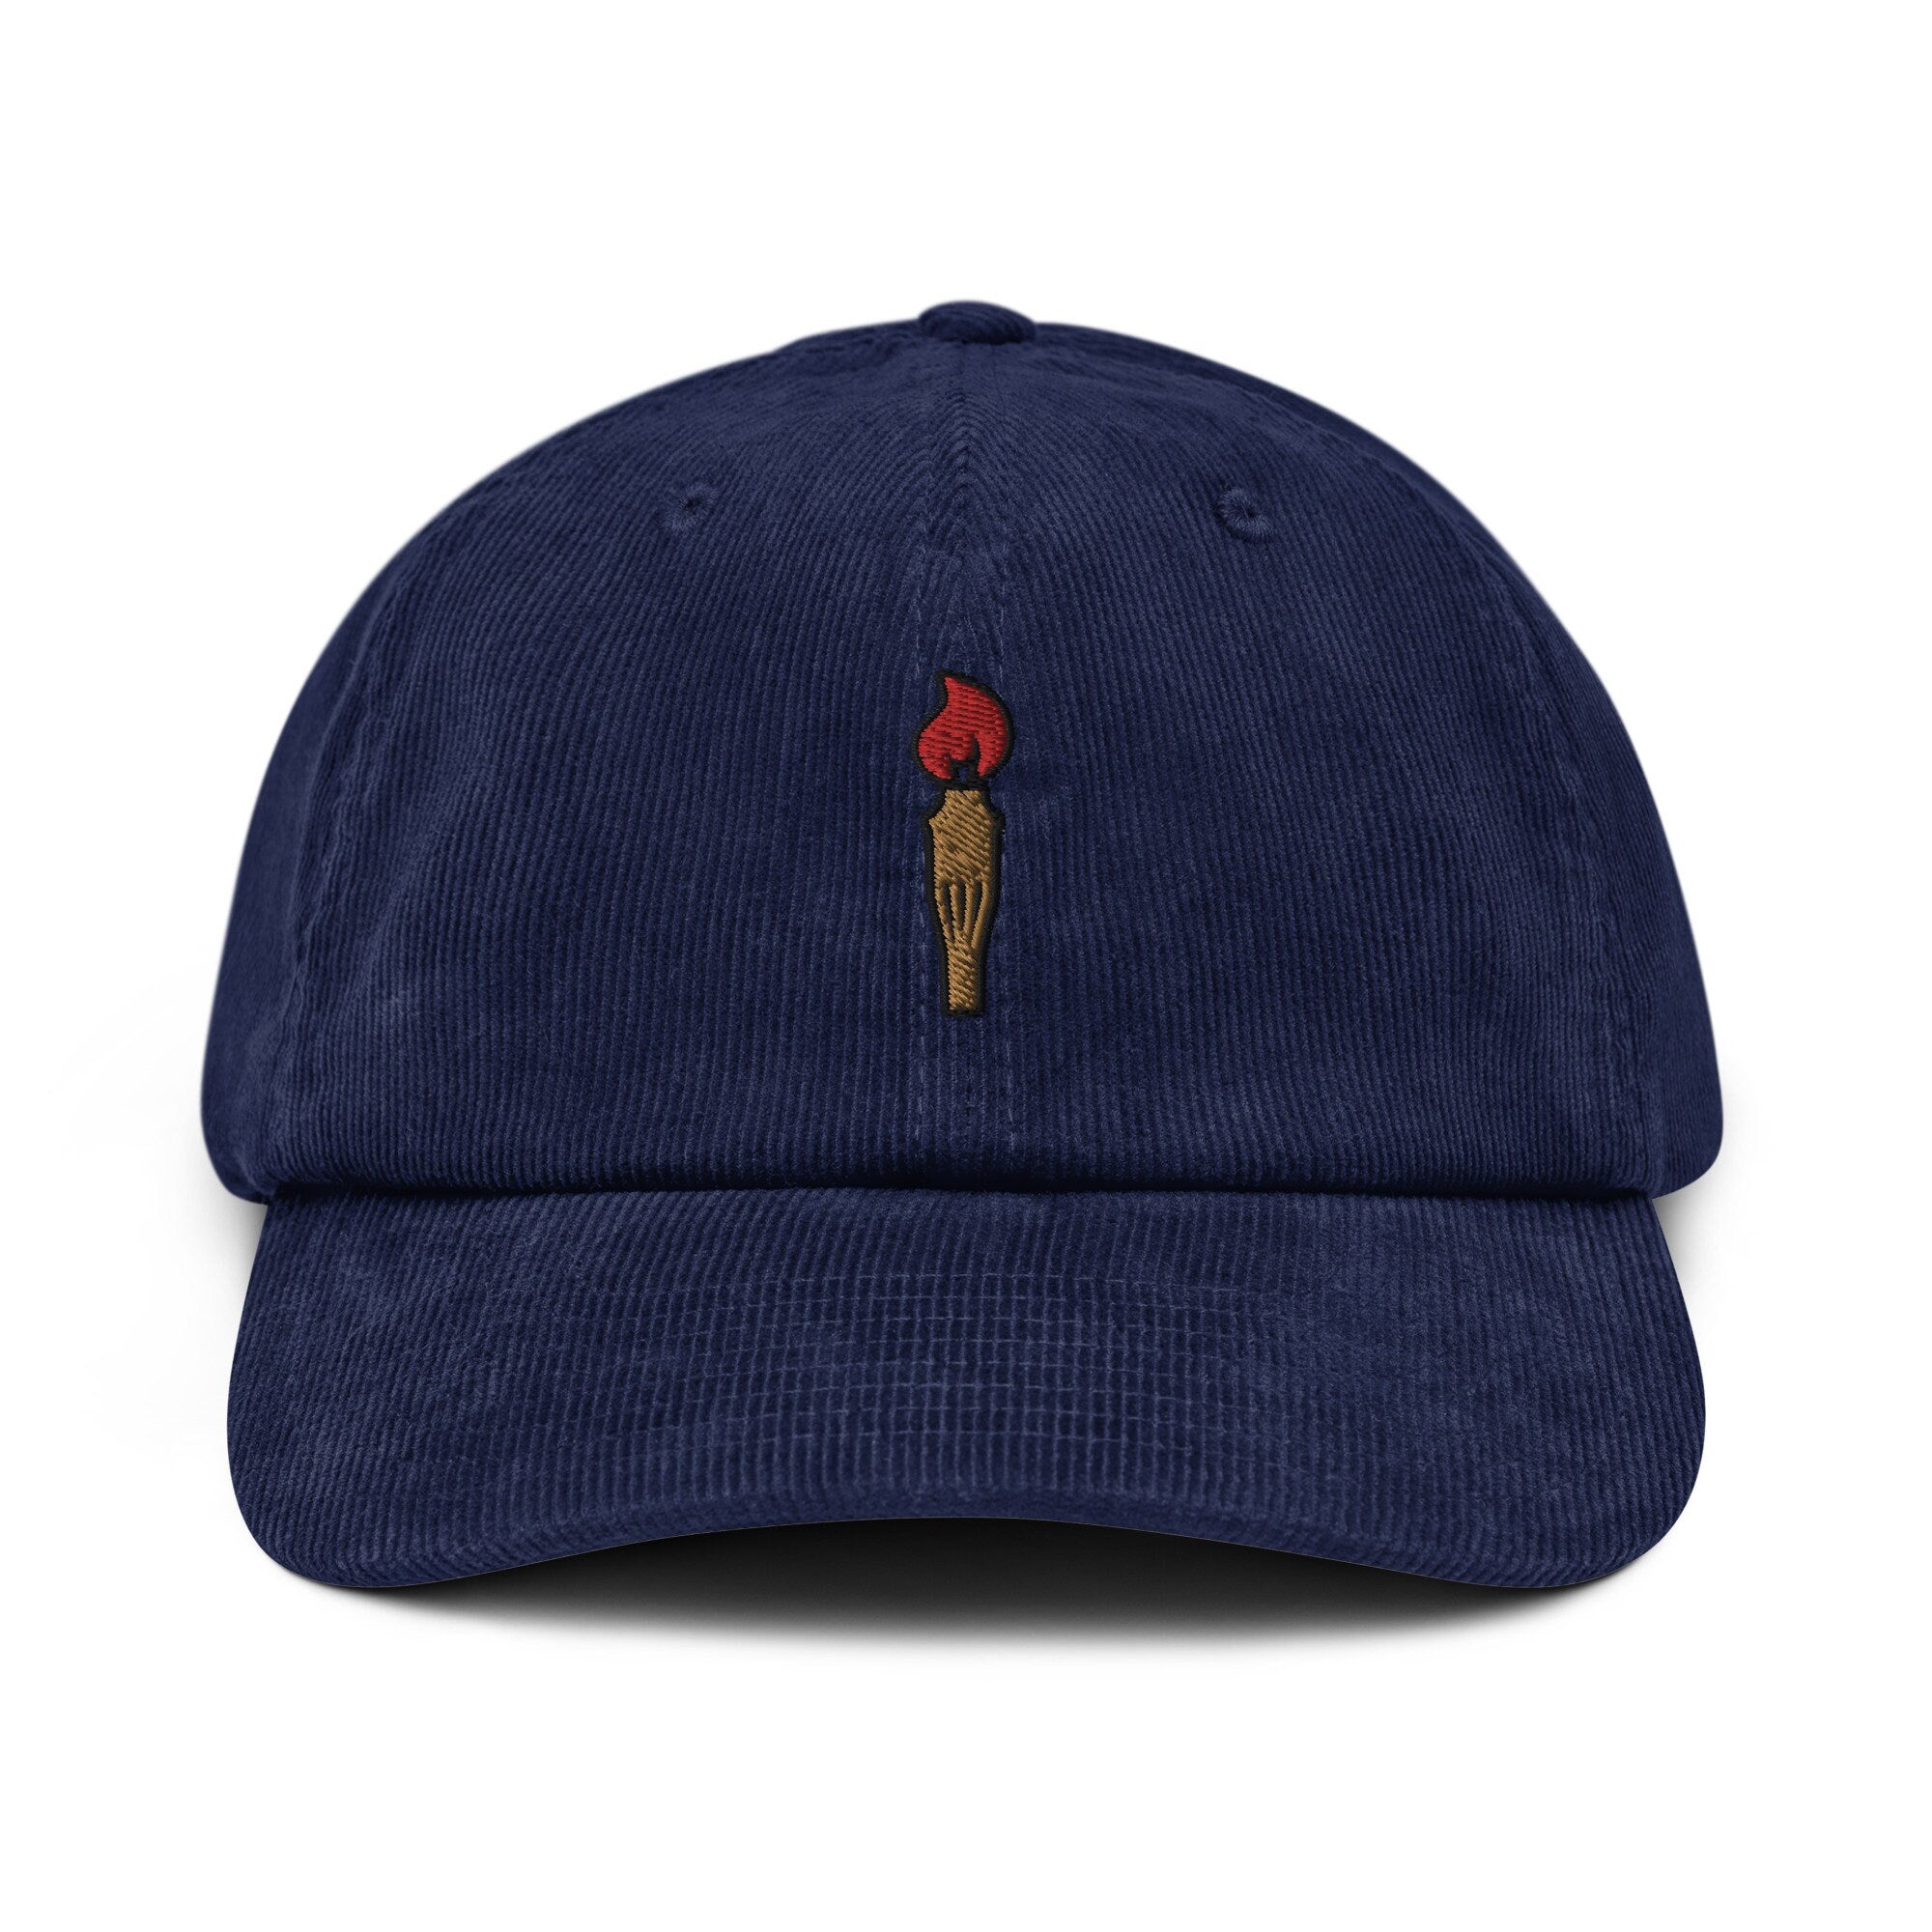 Tiki Torch Corduroy Hat, Handmade Embroidered Corduroy Dad Cap - Multiple Colors